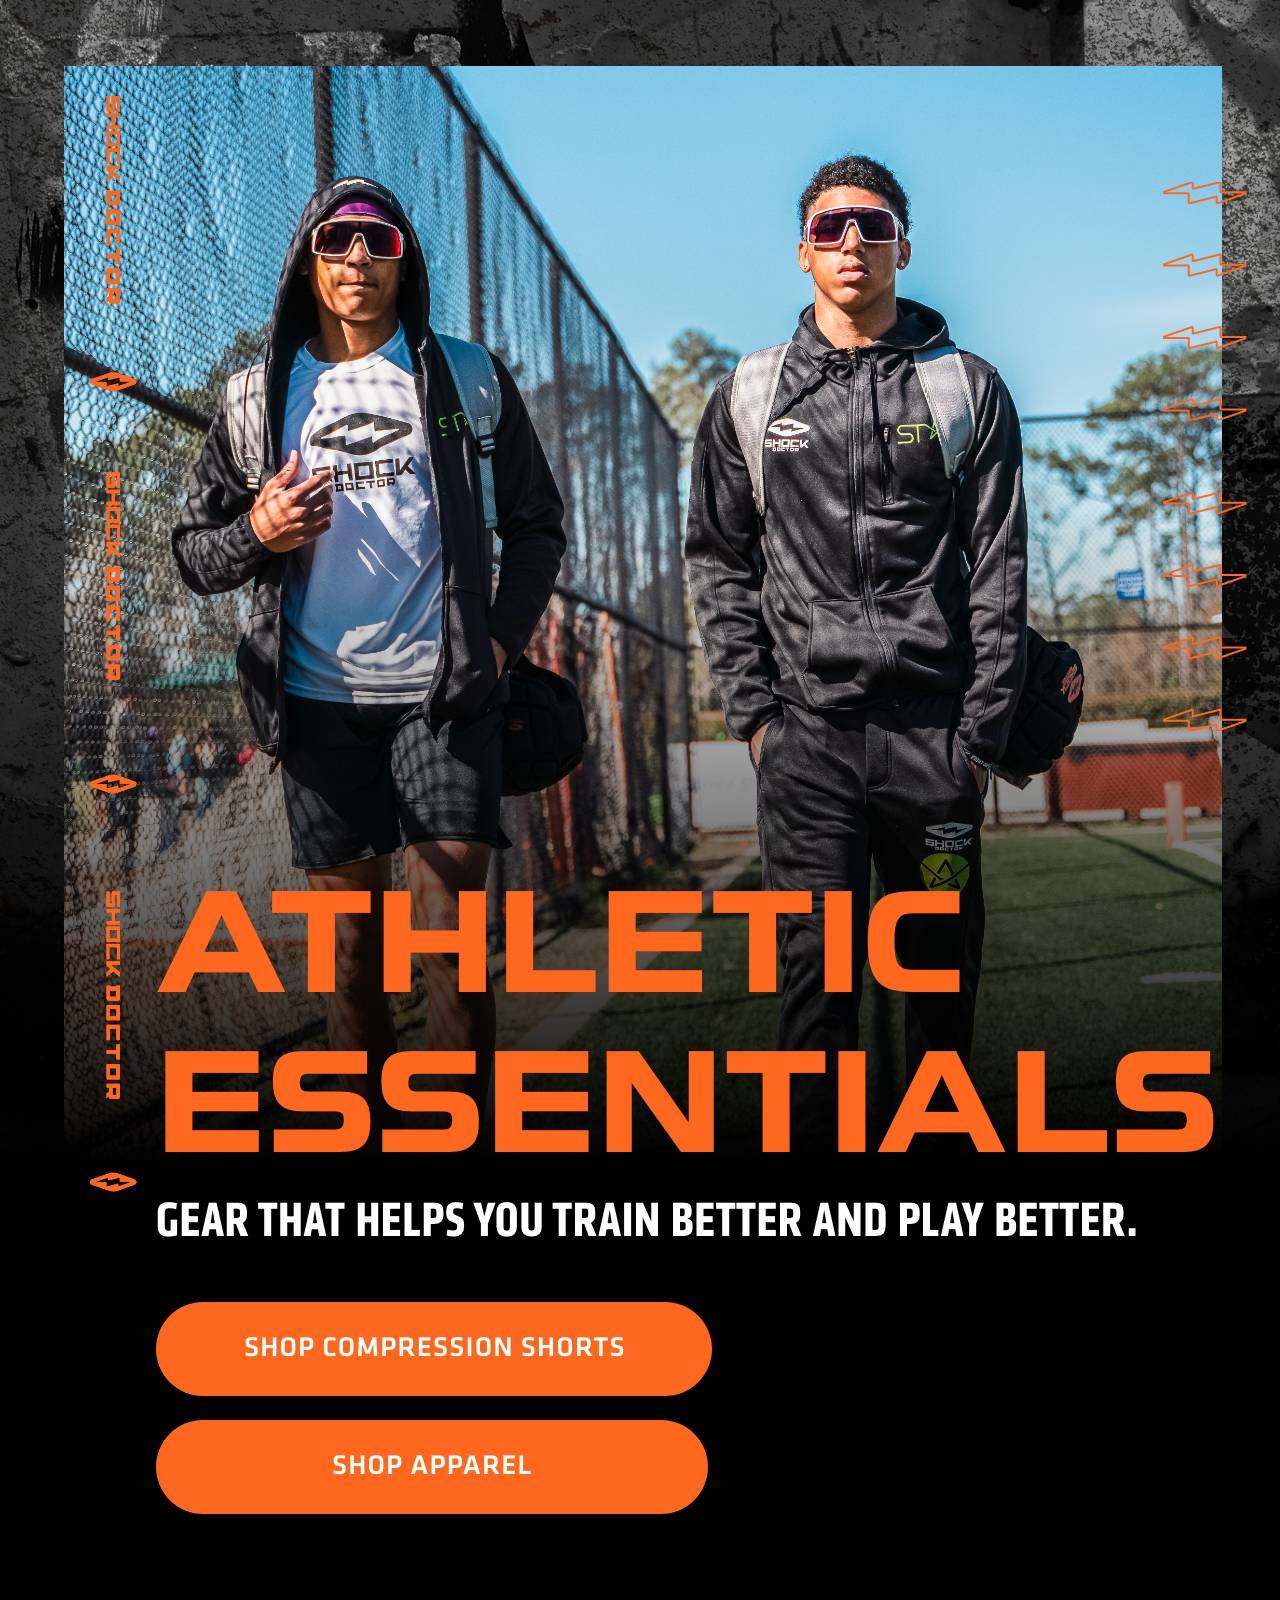 Athletic Essentials - Gear That Helps You Train Better And Play Better  - Shop Compression Shorts - Shop Apparel